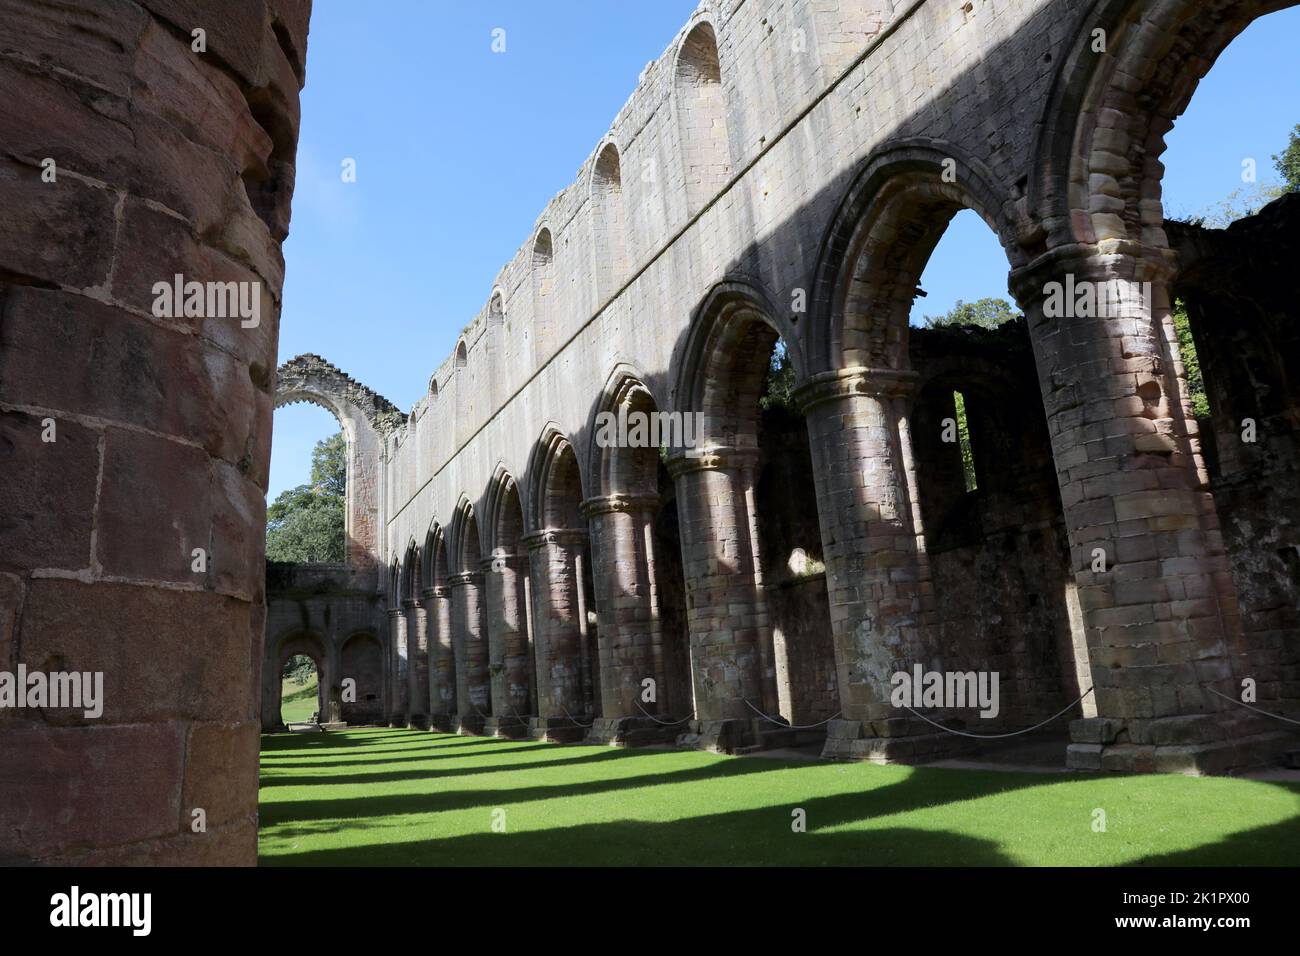 Interior of the ruined Fountains Abbey church looking down the nave, in North Yorkshire, England, UK. Stock Photo